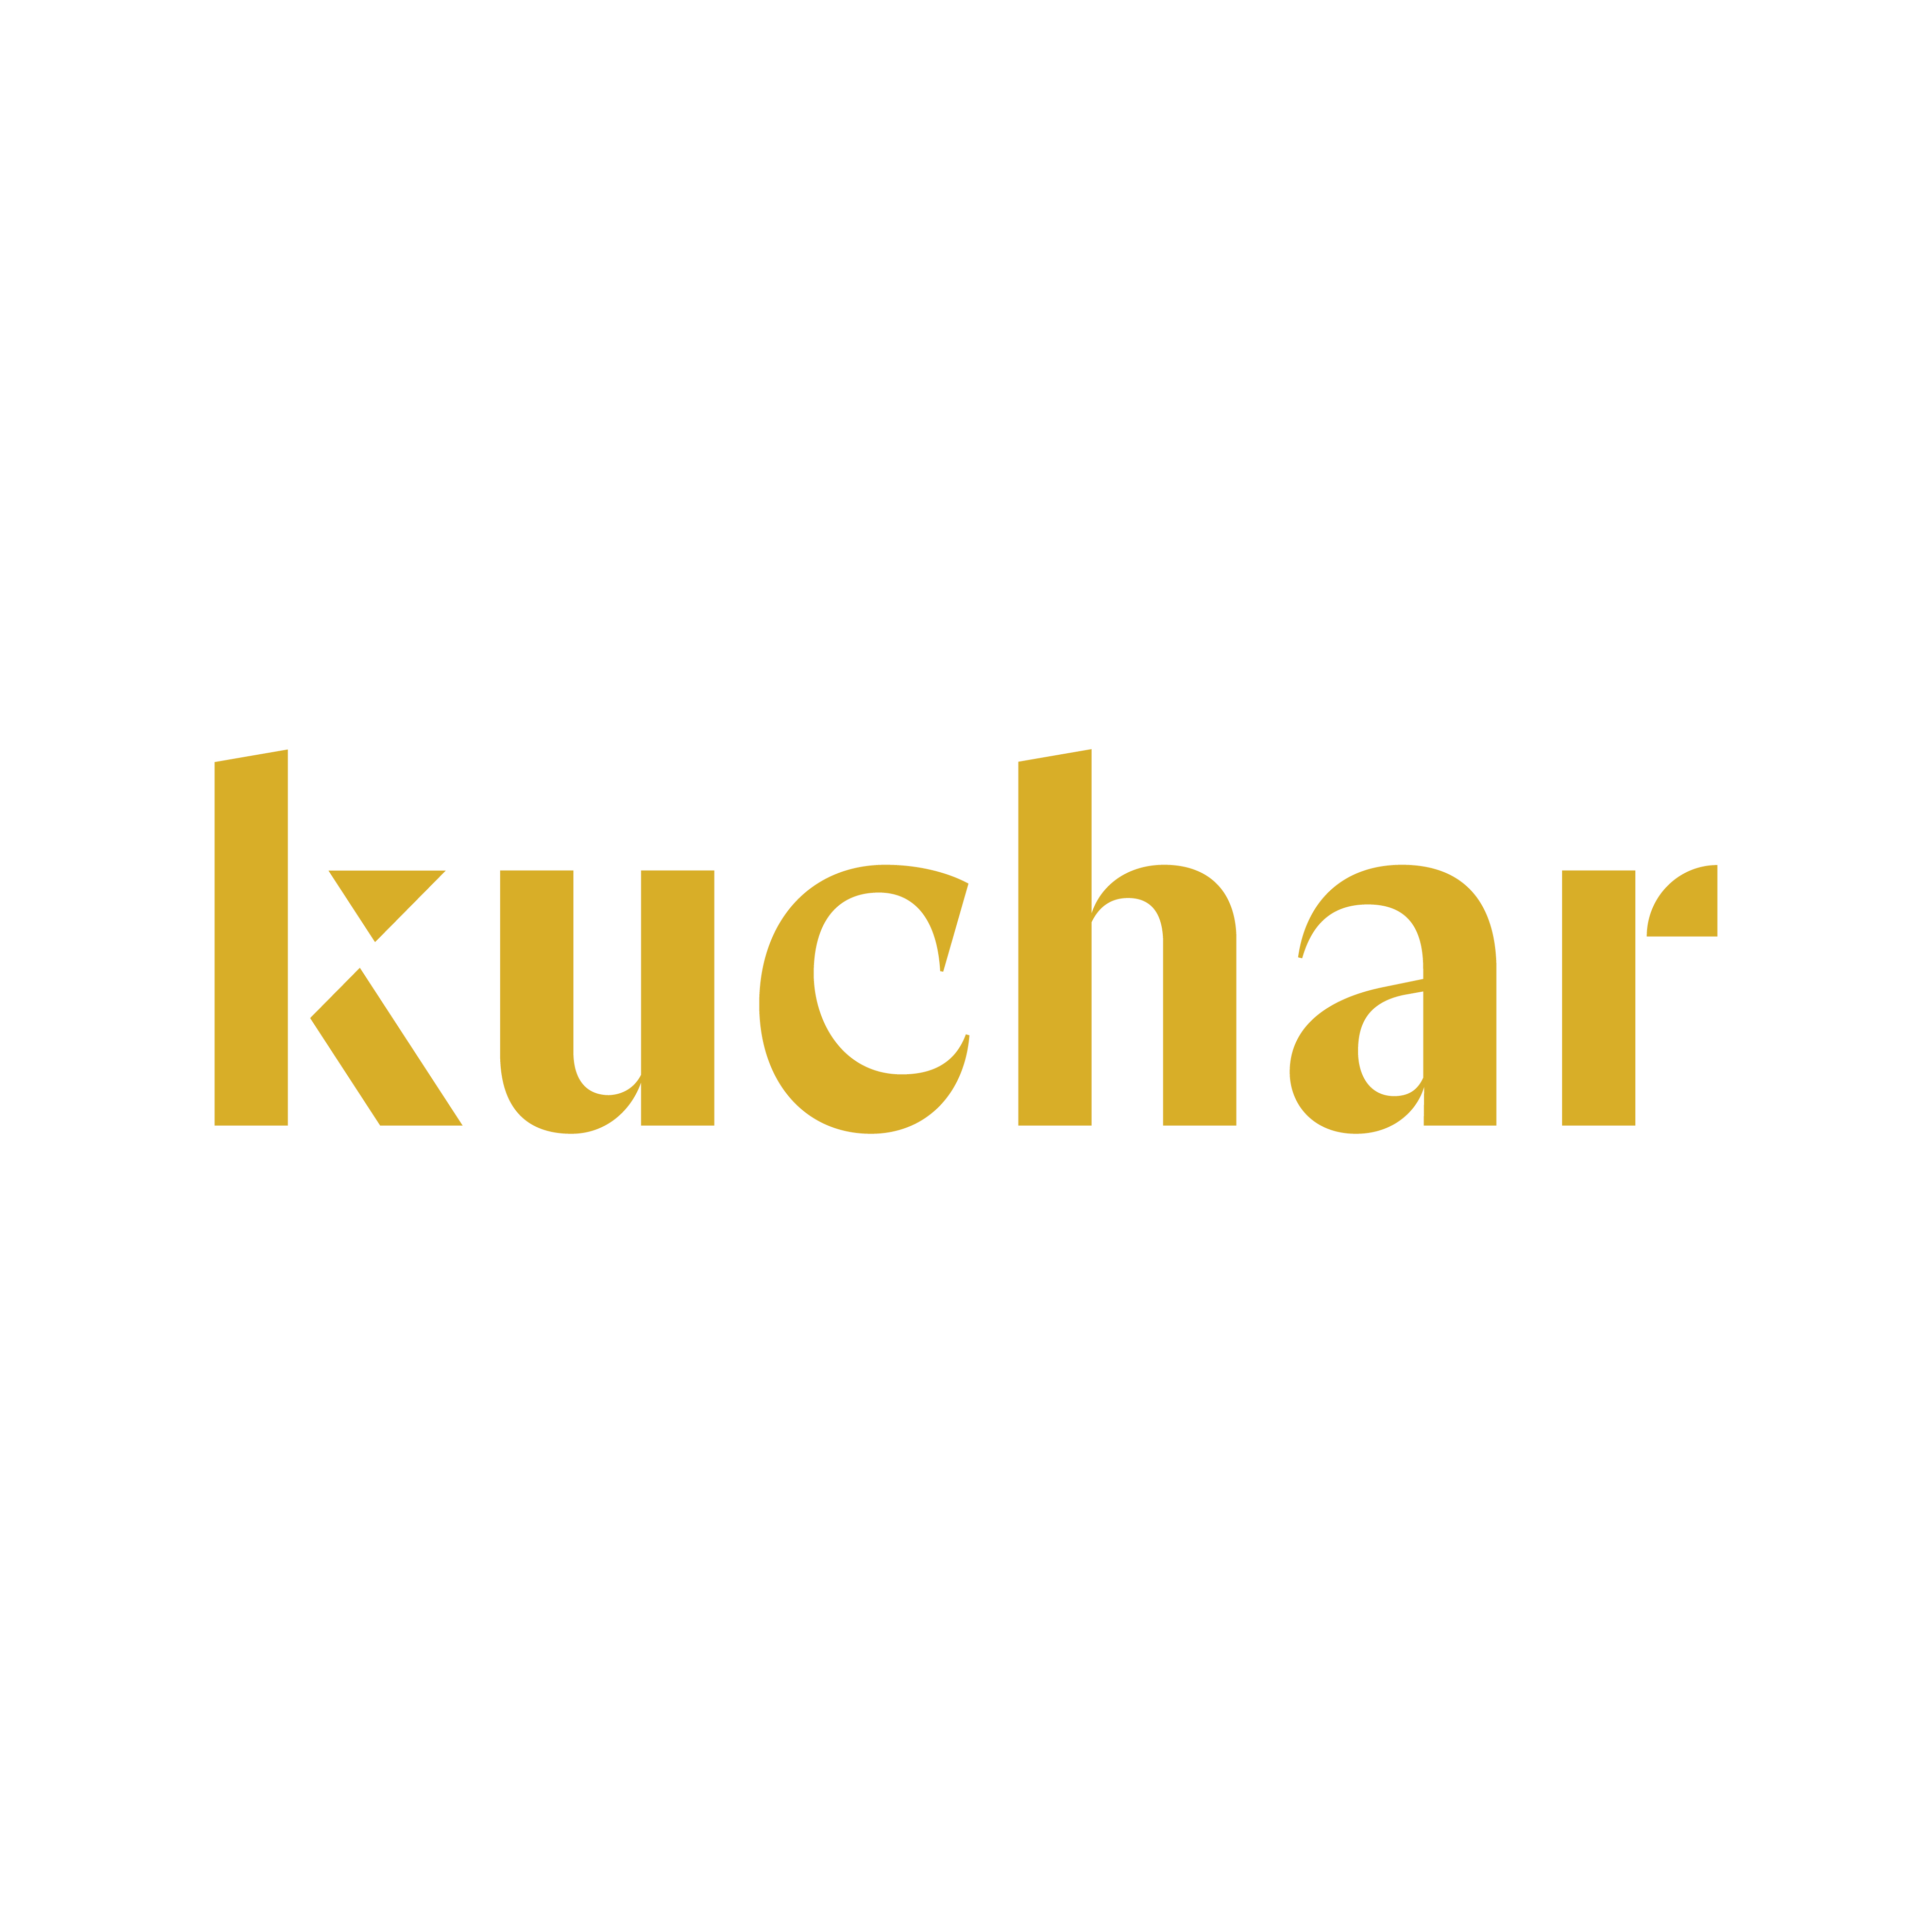 Peopledesign-kuchar logo design by logo designer Peopledesign for your inspiration and for the worlds largest logo competition